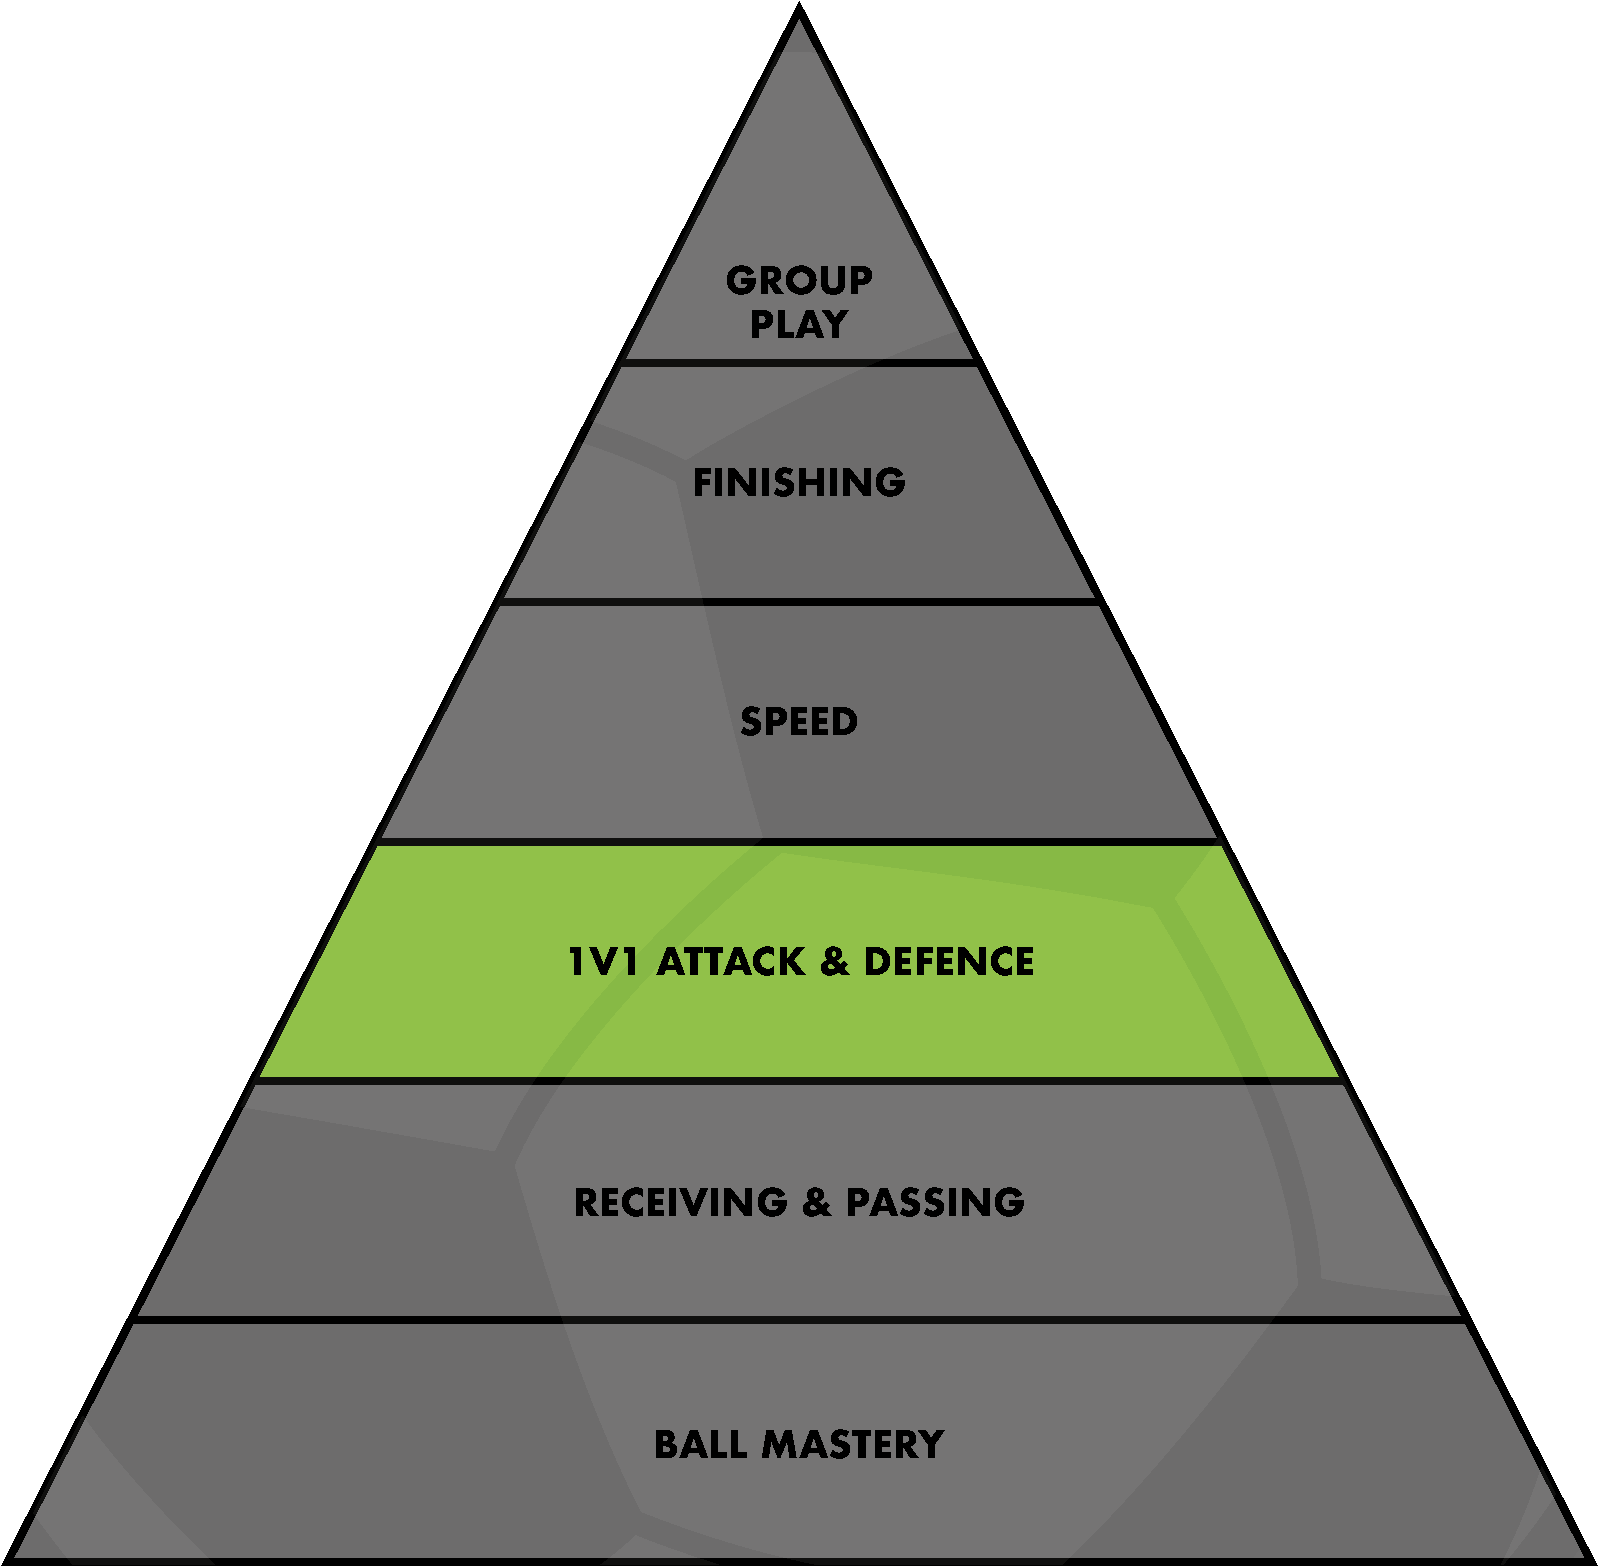 The Pyramid of Player Development